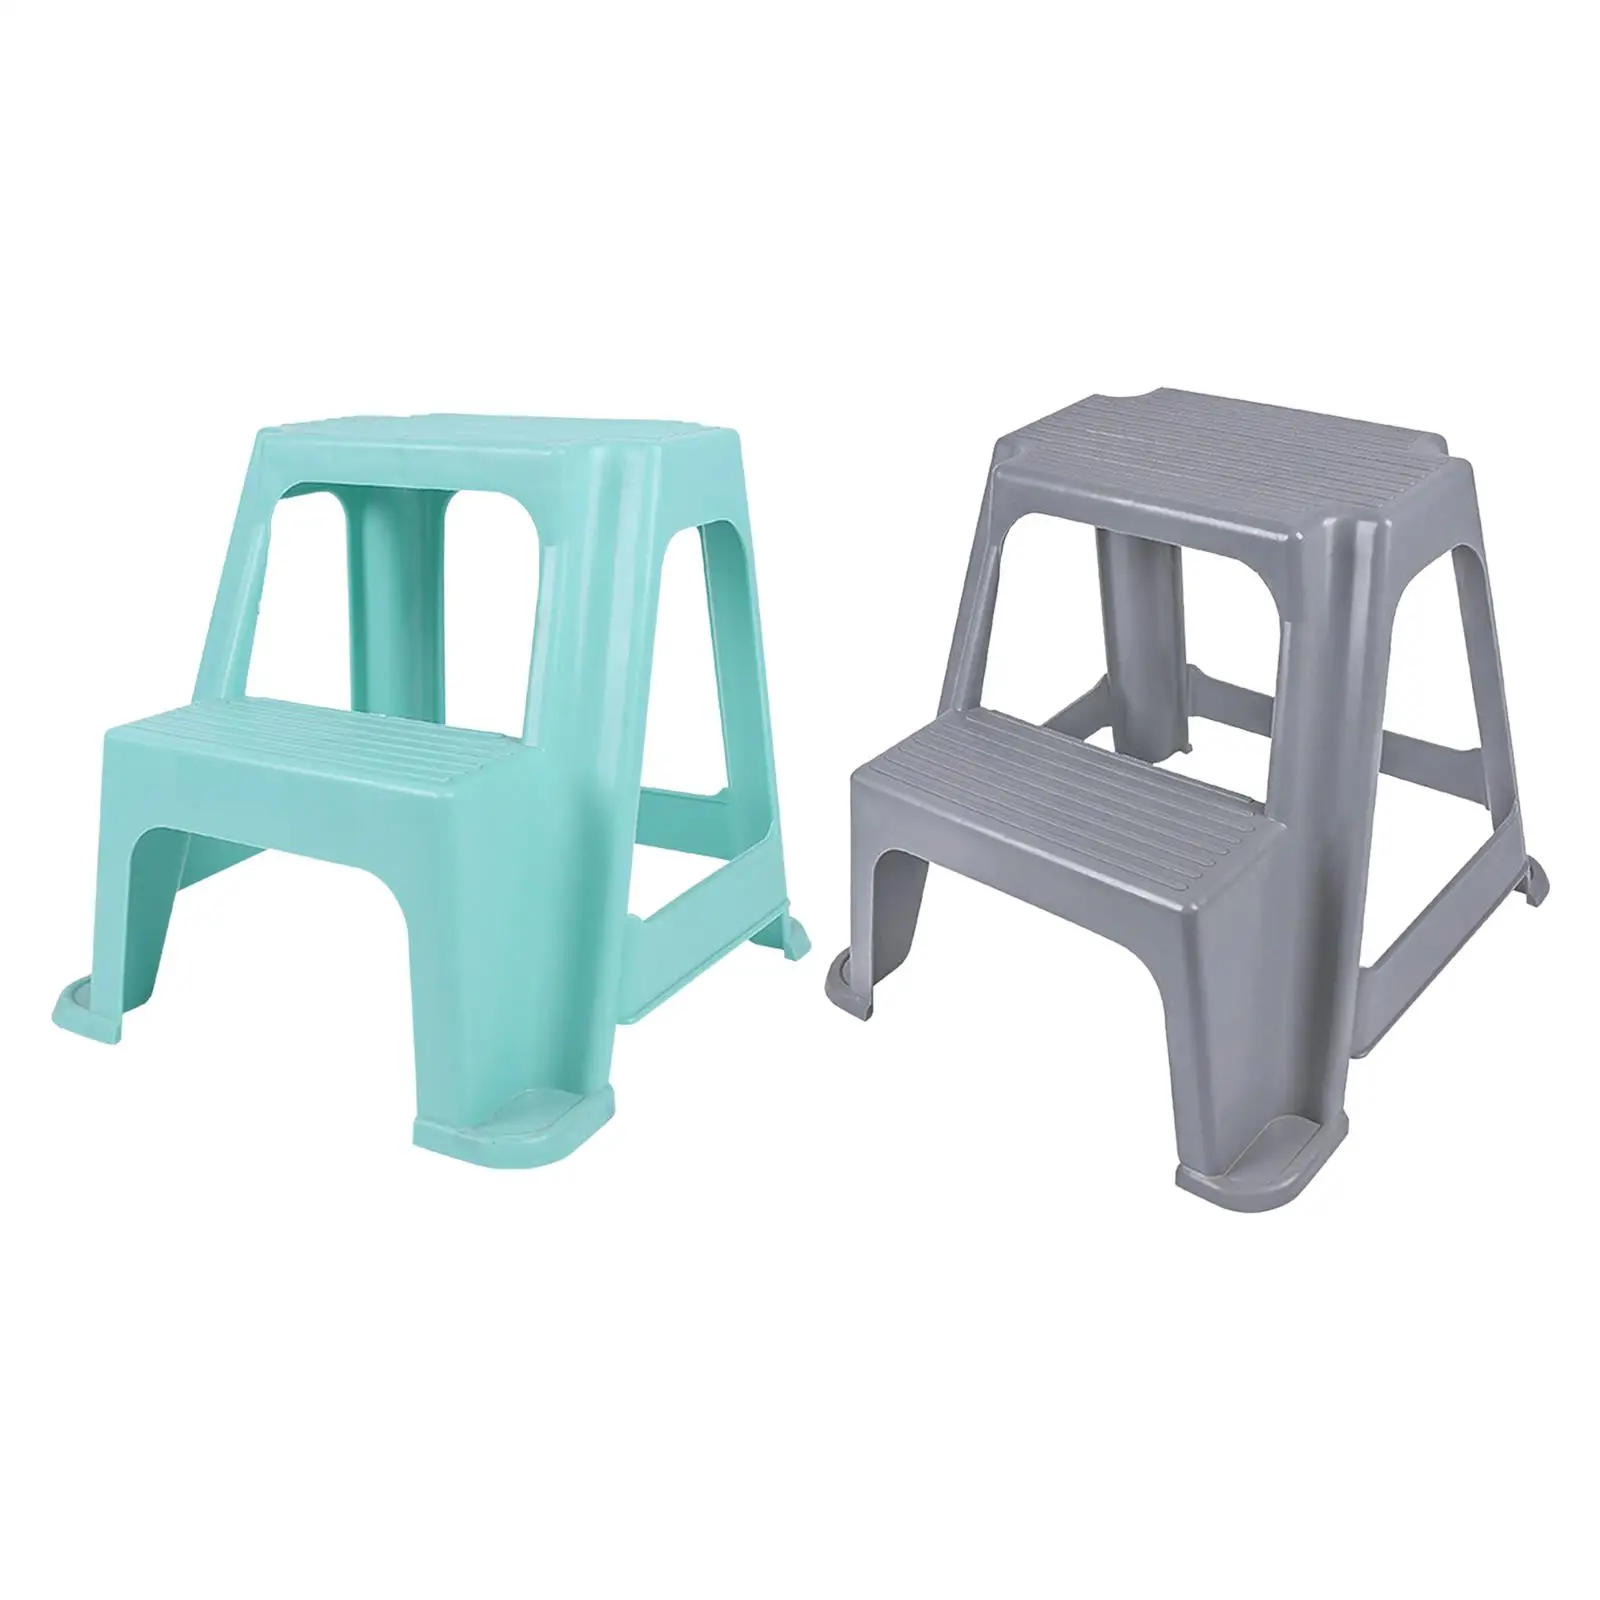 Two Step Stool Stepping Stool Anti Slip 2 Step Stool Double up Step Stool Stepstool for Kids Children Adults Pets Potty Training